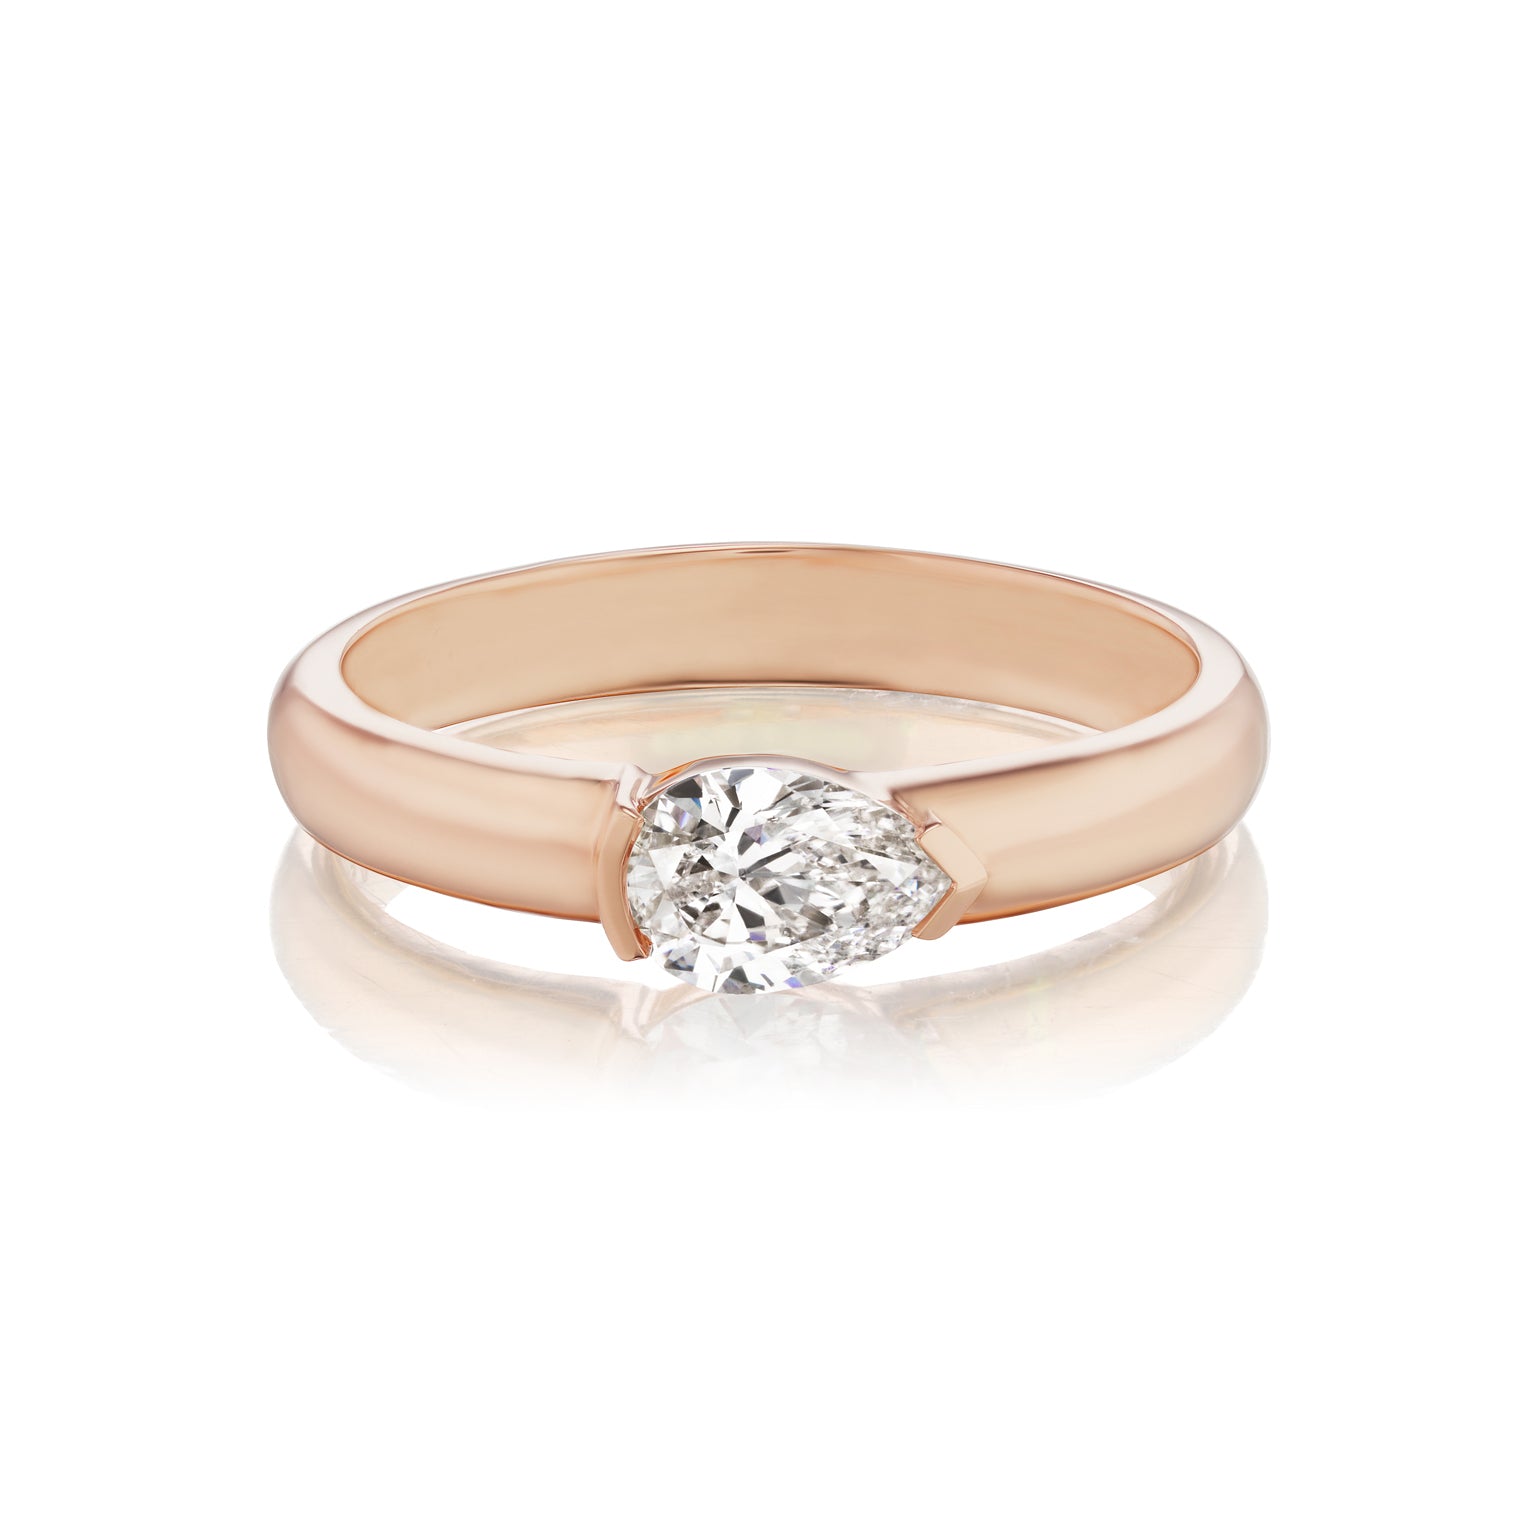 East-West Pear Diamond Solitaire Band